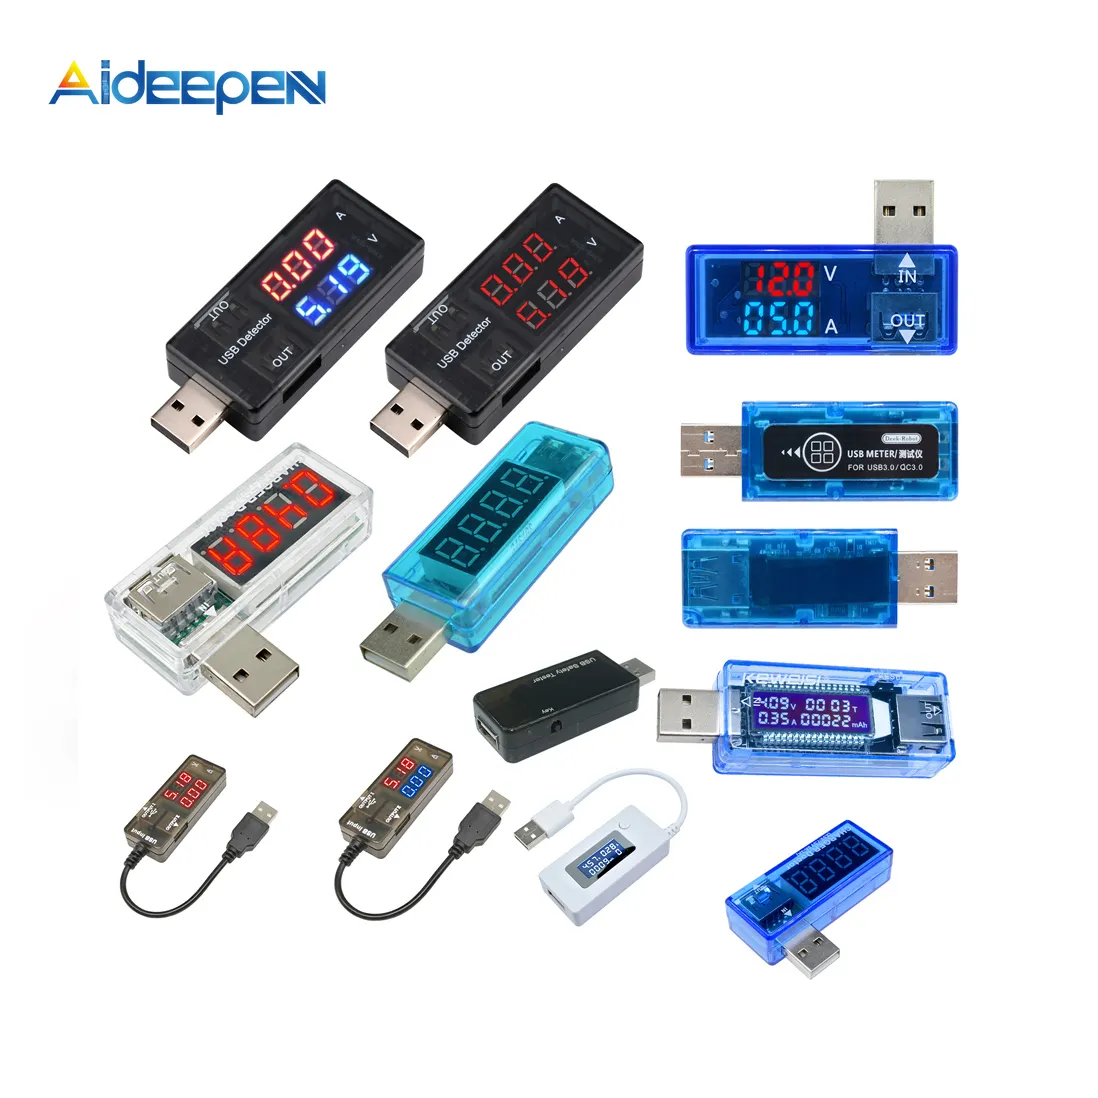 6/8/10 In 1 High Precision USB Charger Tester LCD Display Digital Voltmeter Ammeter Battery Capacity Tester Detector Power Meter